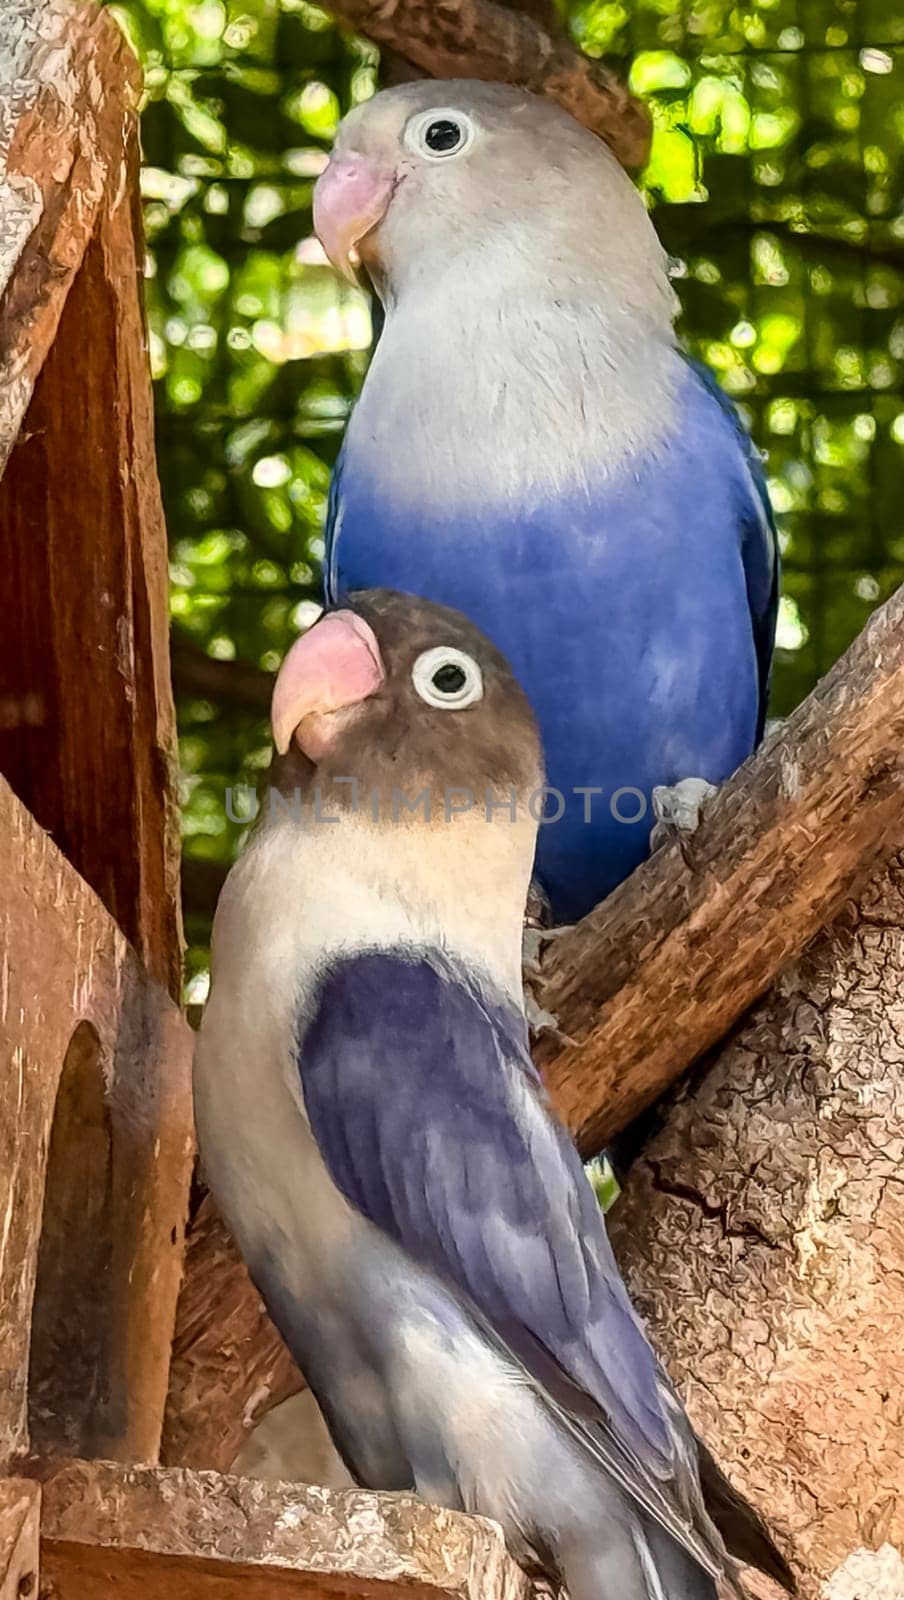 lovebirds are perched on a tree branch. This bird which is used as a symbol of true love has the scientific name Agapornis fischeri by antoksena